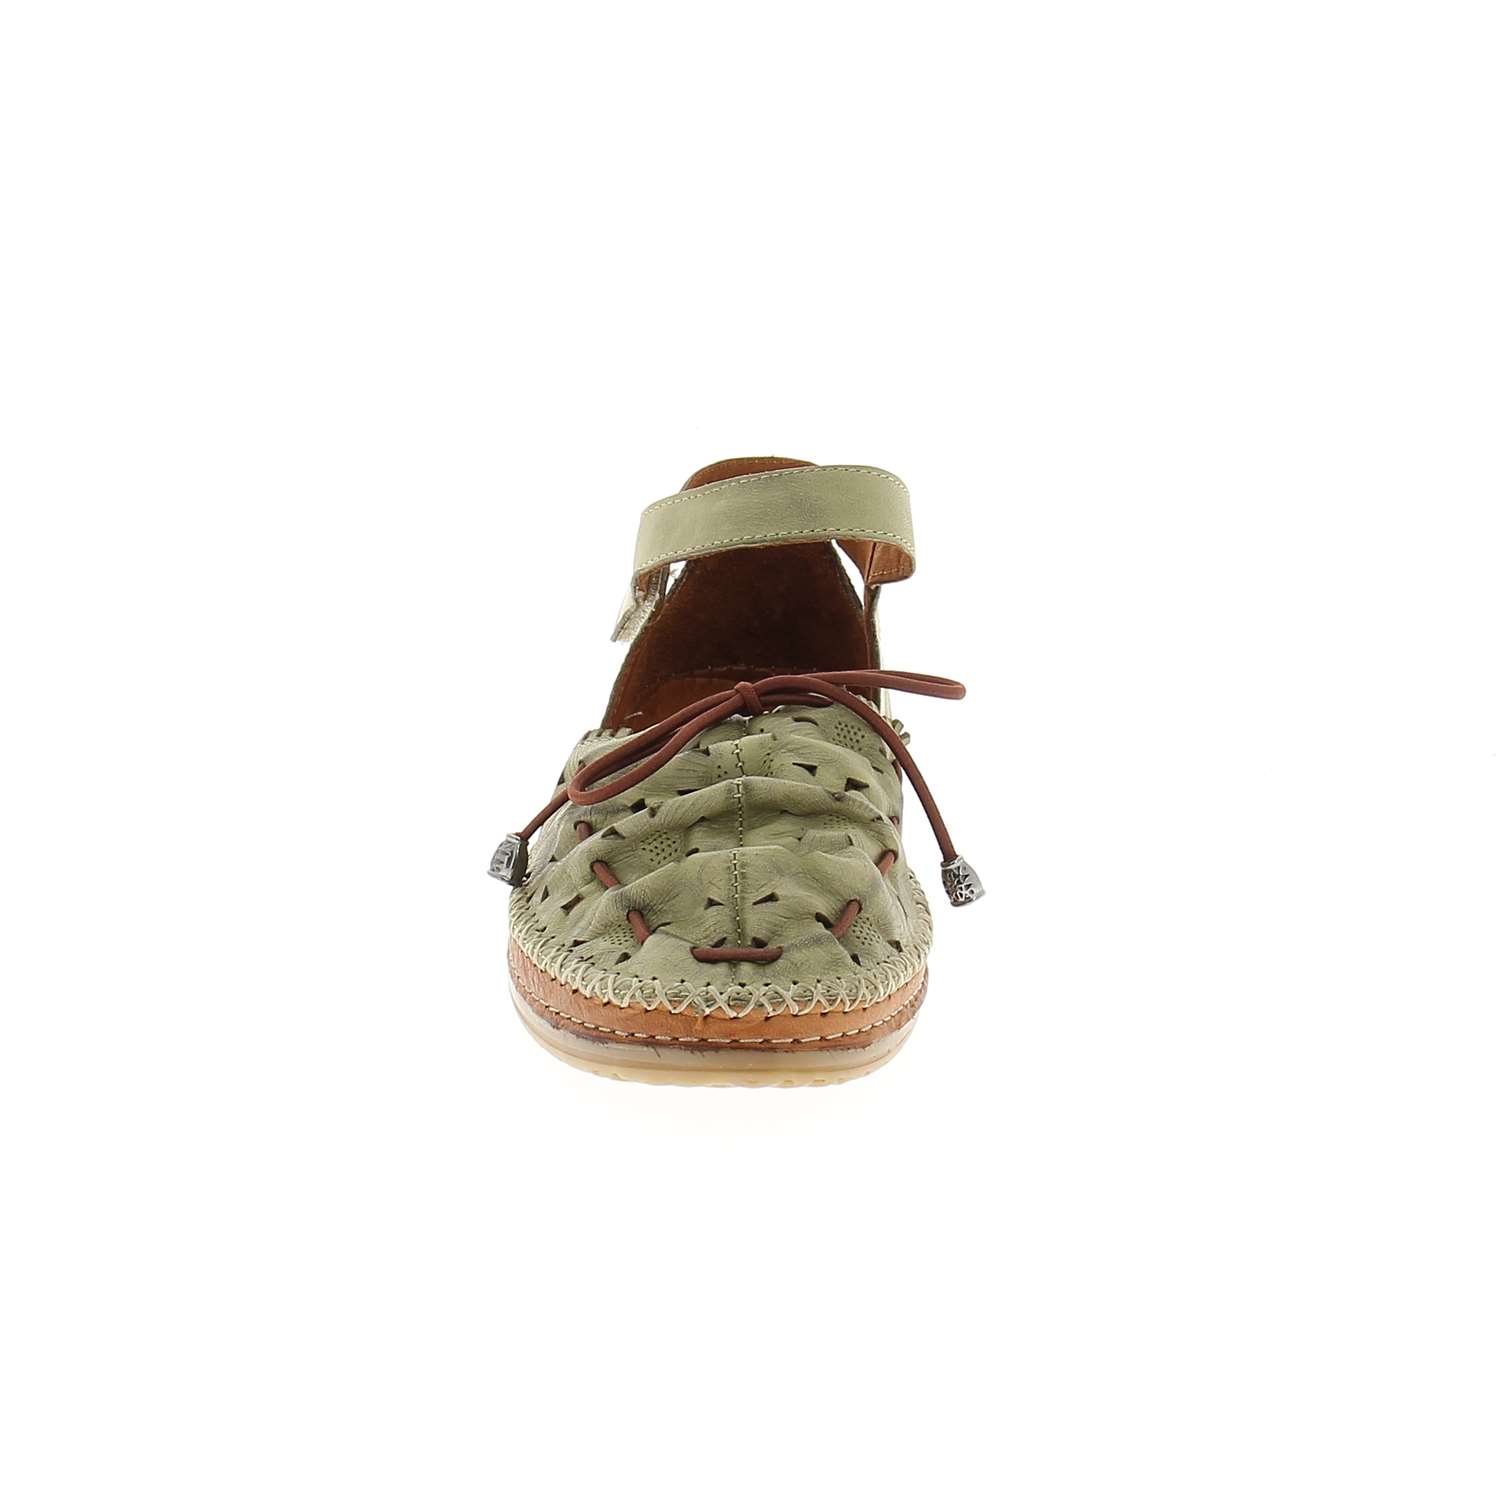 03 - MARLY - MADORY - Ballerines et babies - Cuir